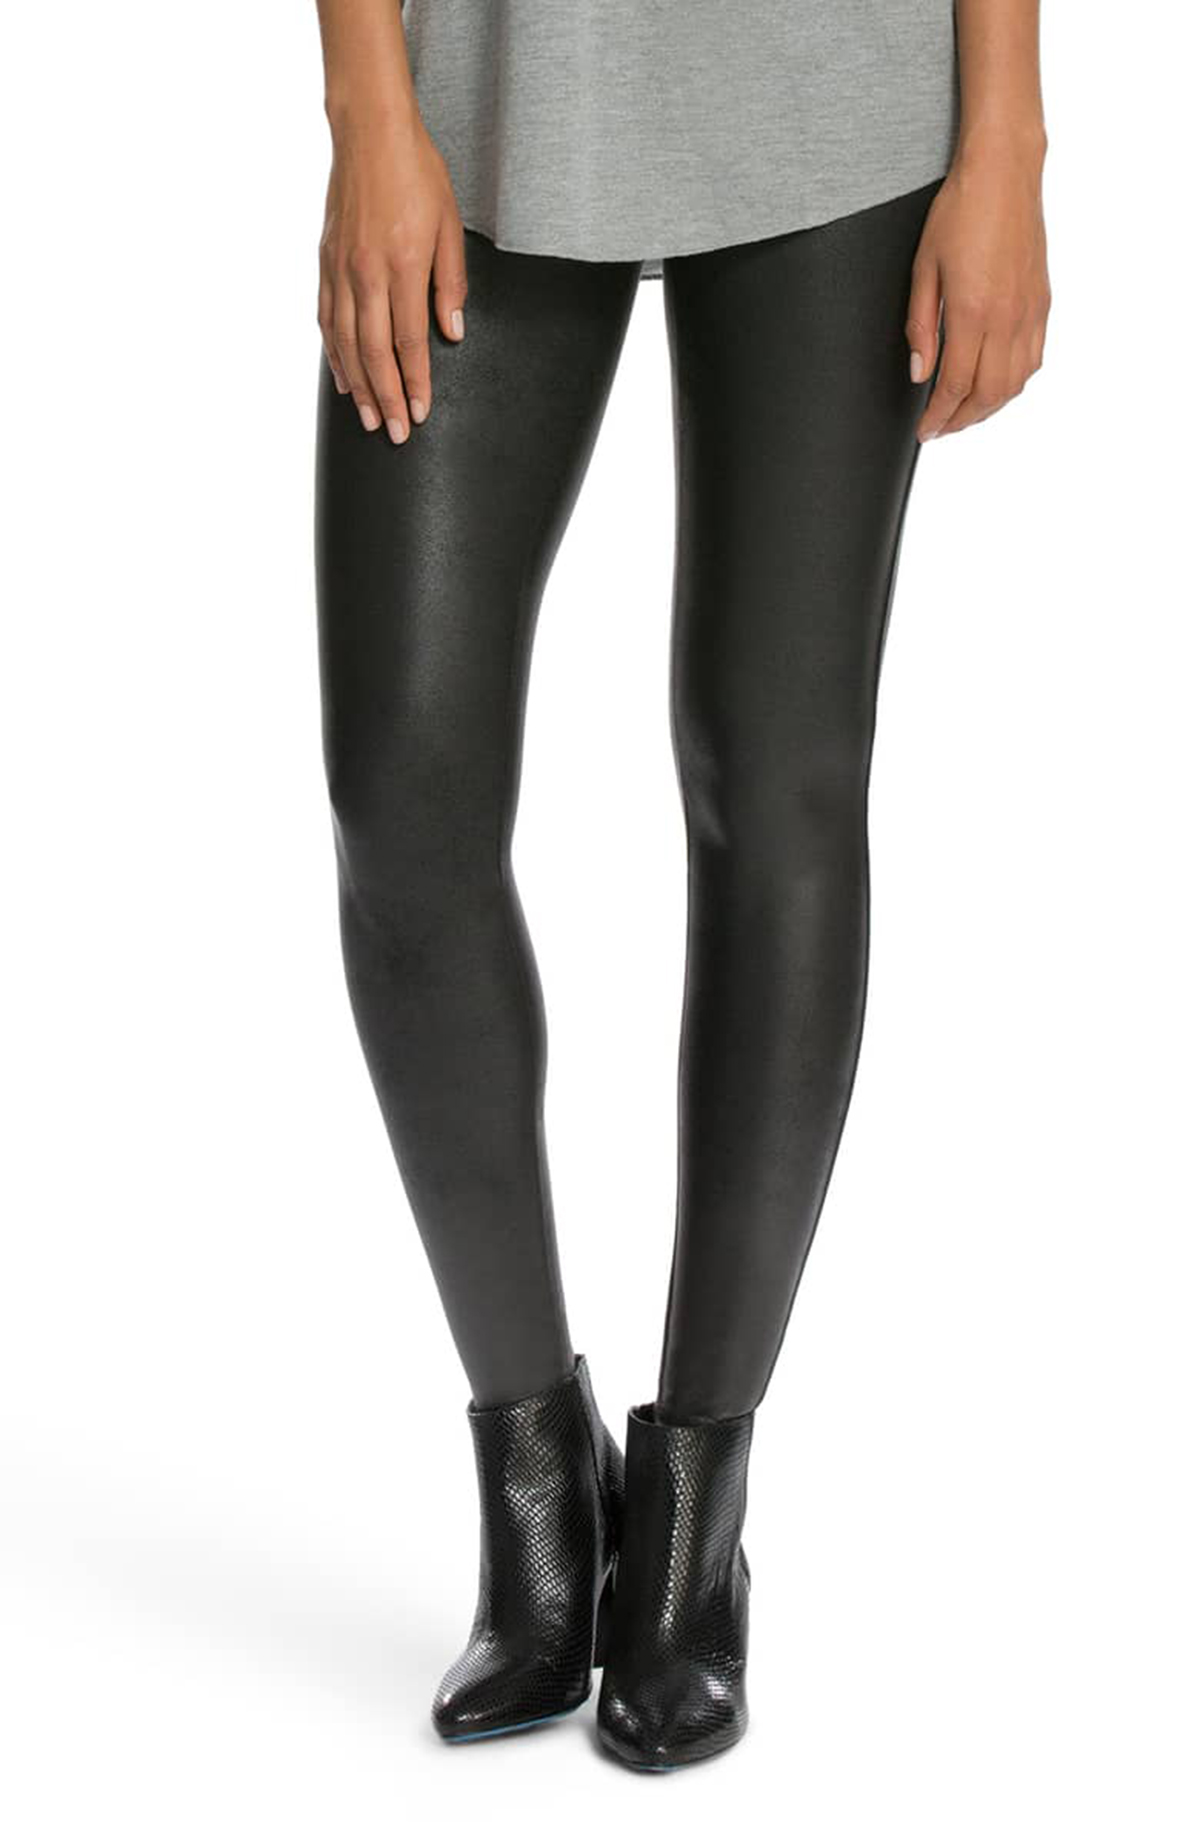 The Best Faux-Leather Black Leggings for All Body Types & Budgets